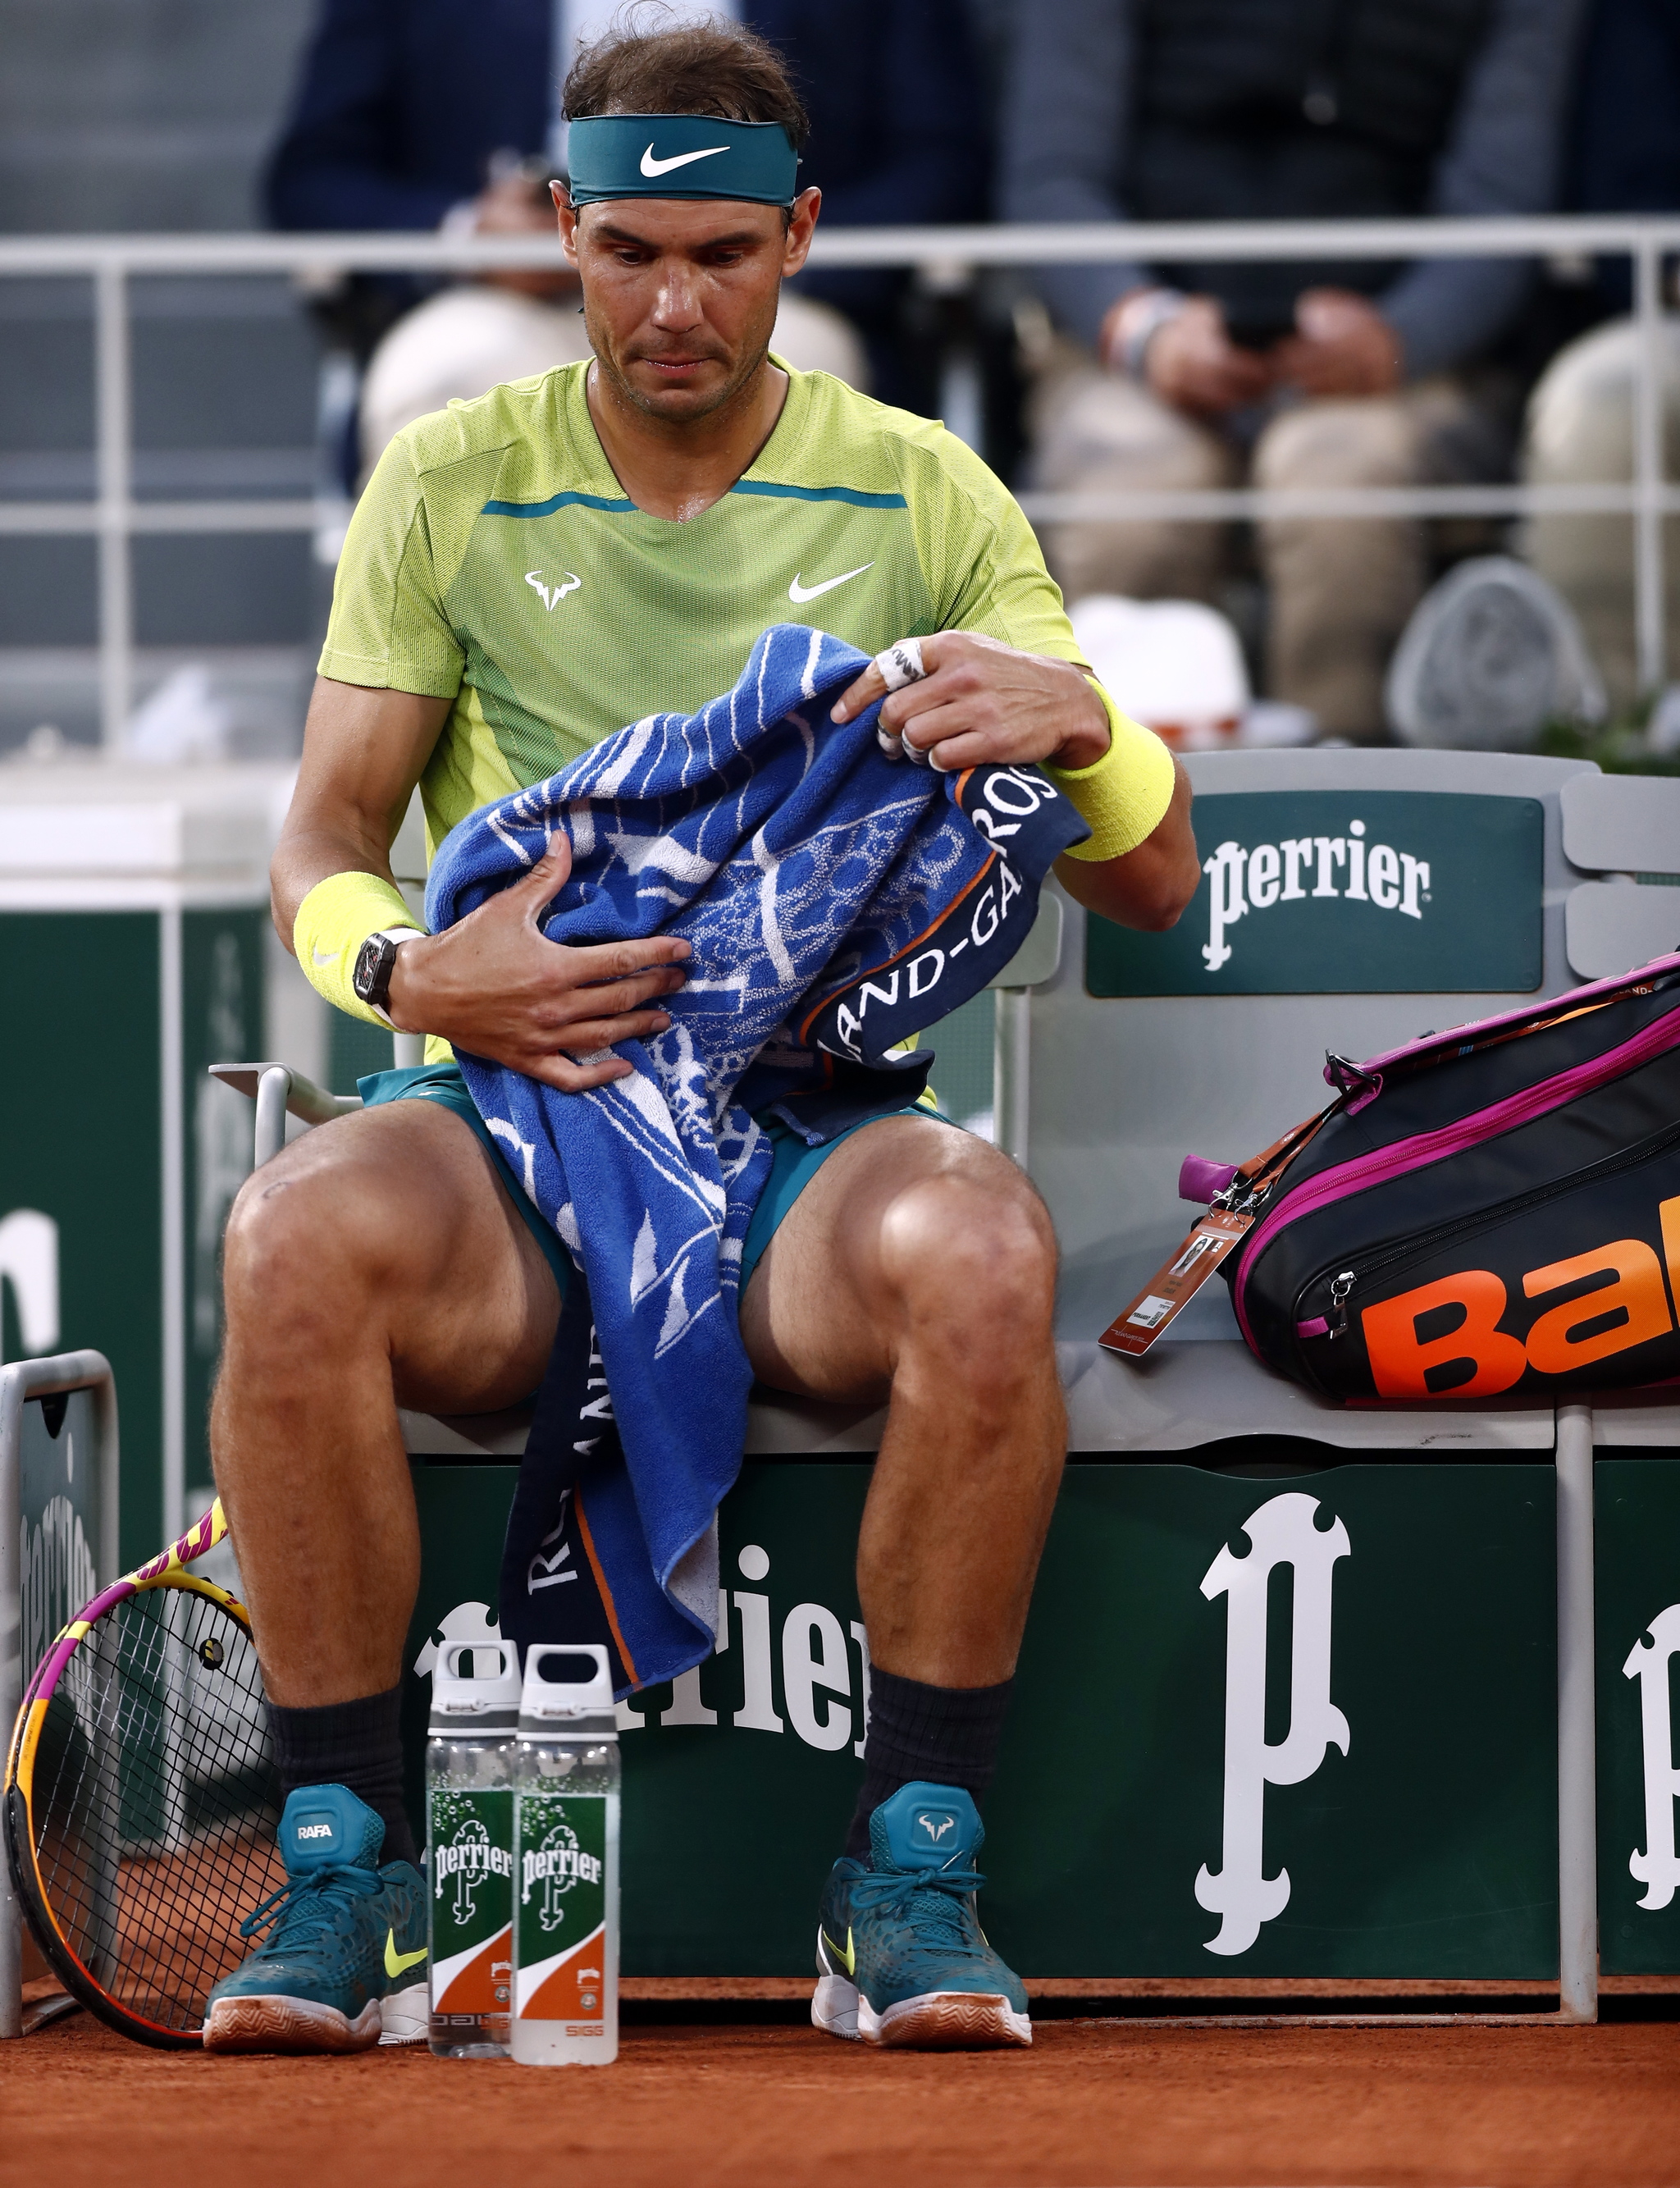 Paris (France), 31/05/2022.- Rafael  lt;HIT gt;Nadal lt;/HIT gt; of Spain reacts during a break as he plays Novak Djokovic of Serbia in their menís quarterfinal match during the French Open tennis tournament at Roland ?Garros in Paris, France, 31 May 2022. (Tenis, Abierto, Francia, España) EFE/EPA/MOHAMMED BADRA